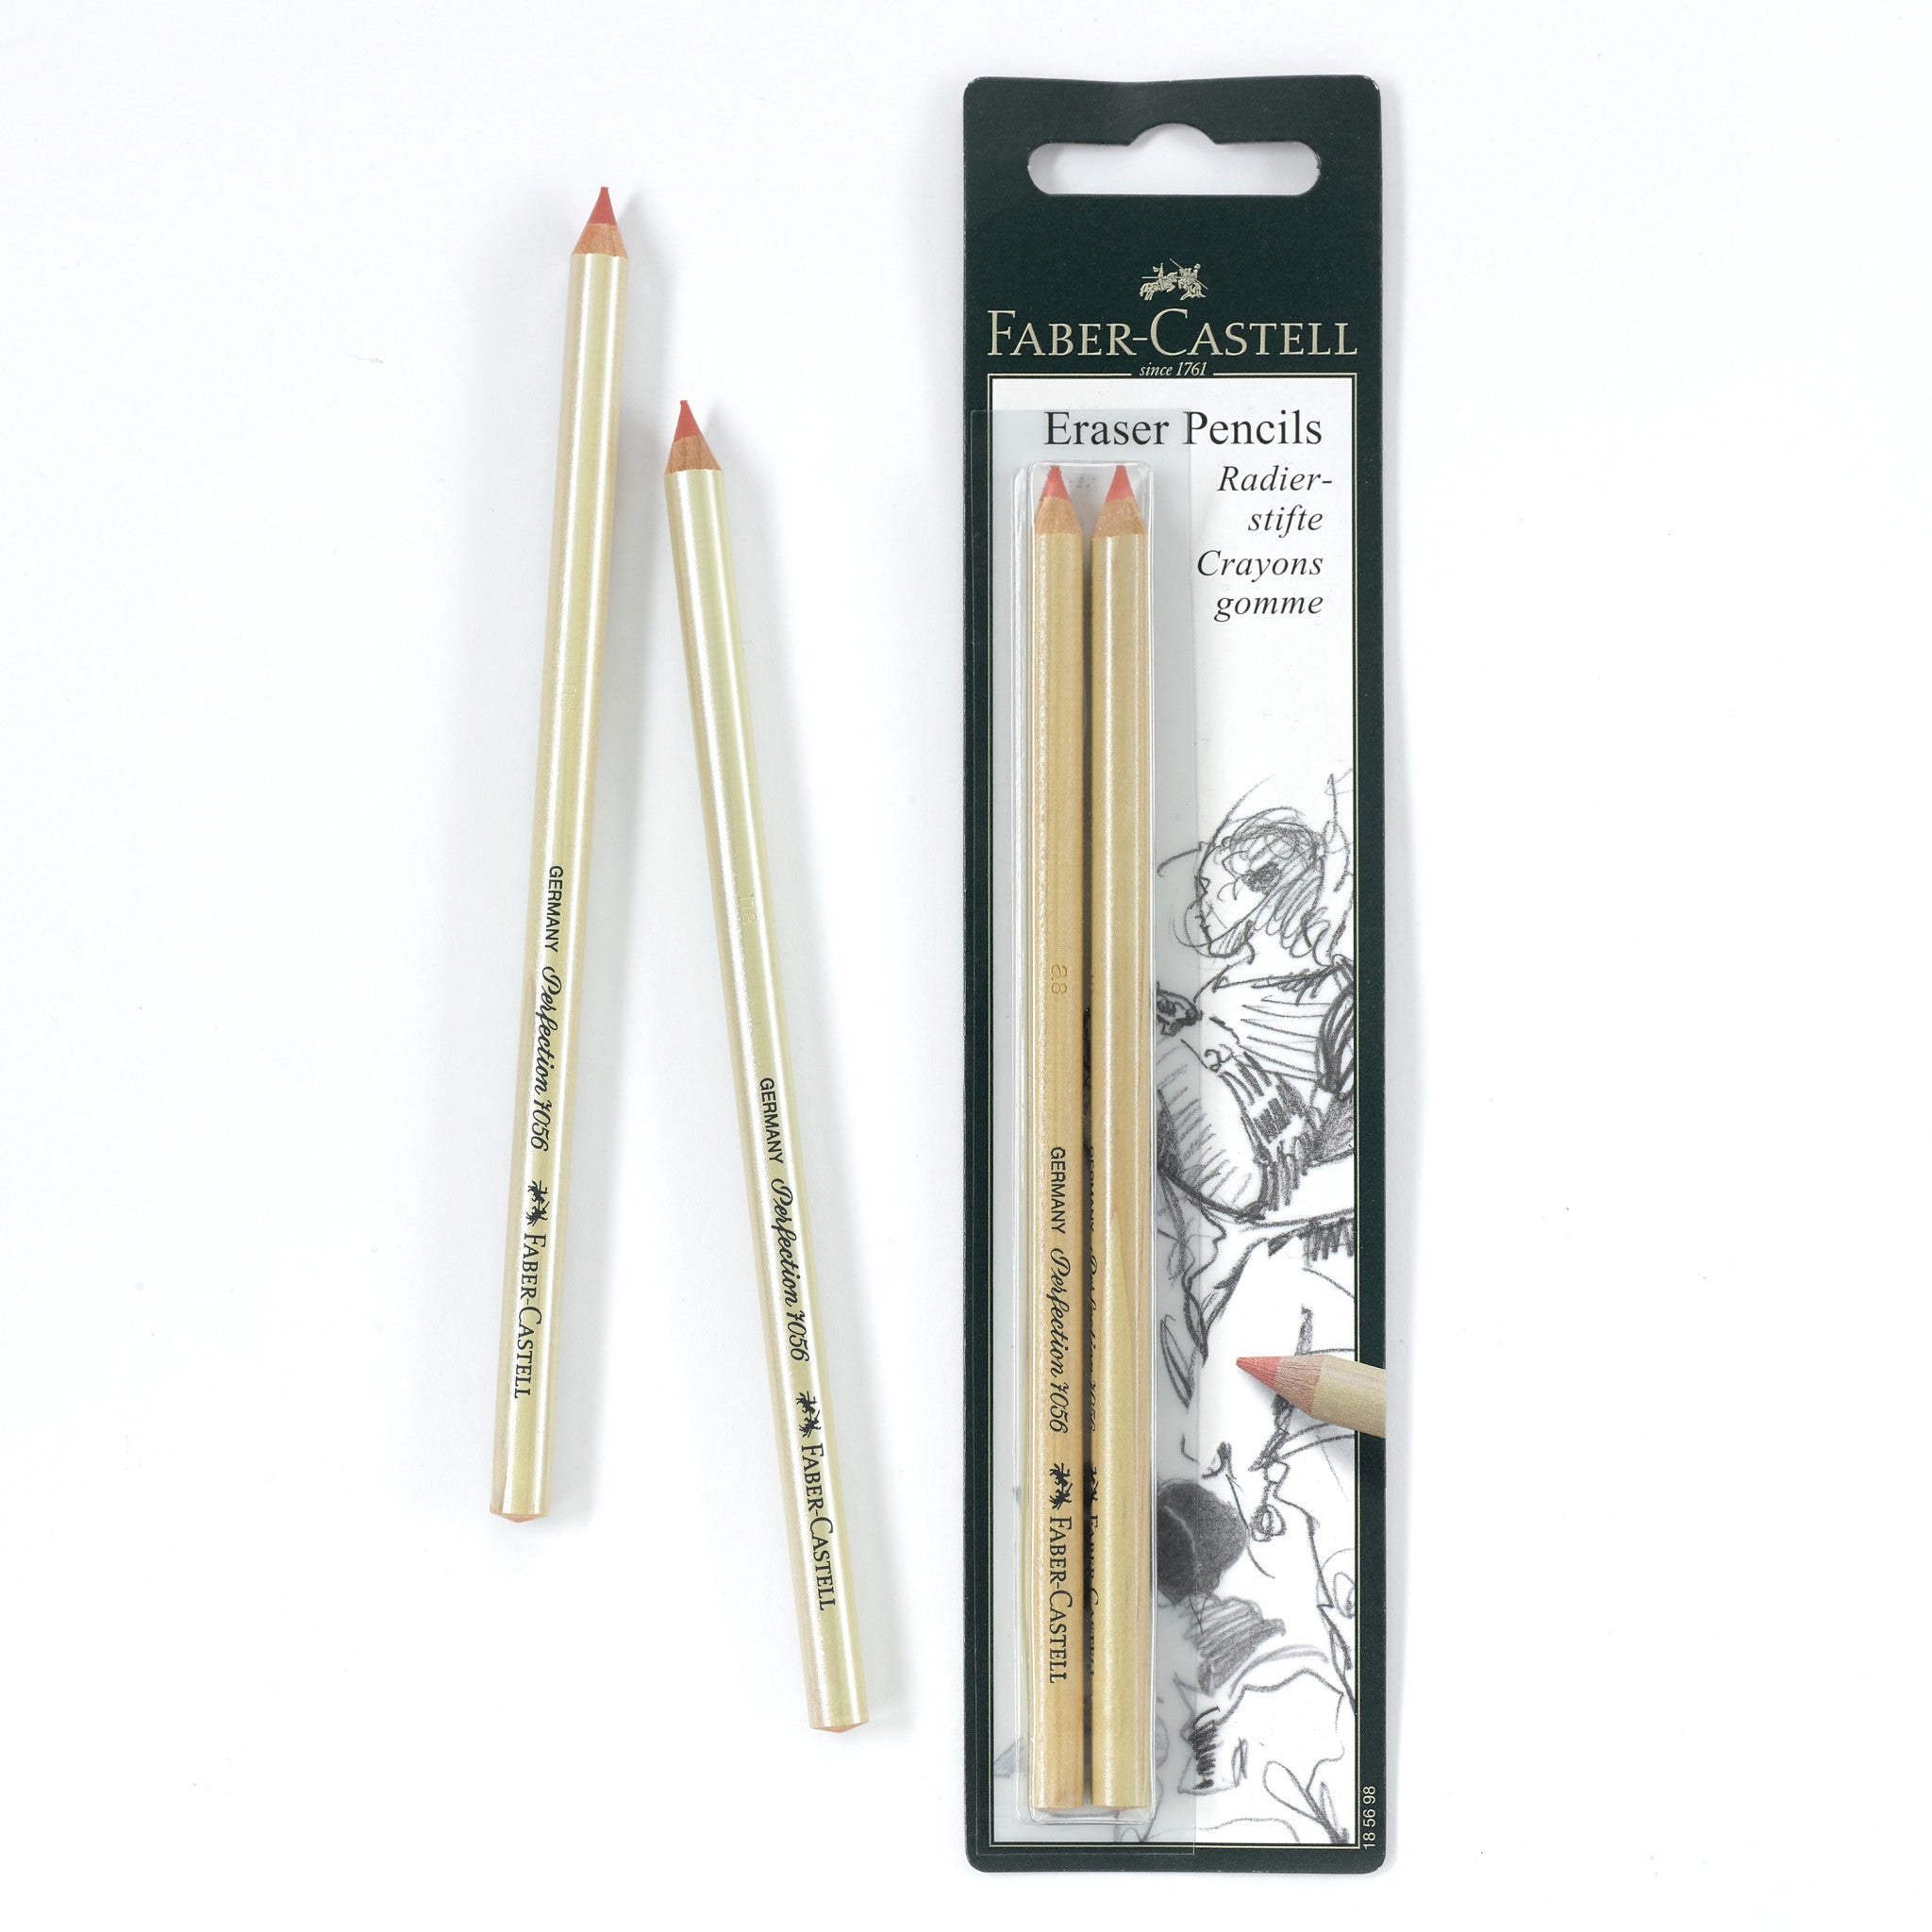 Faber-Castell Perfection 7058 185812 Crayon blanc 